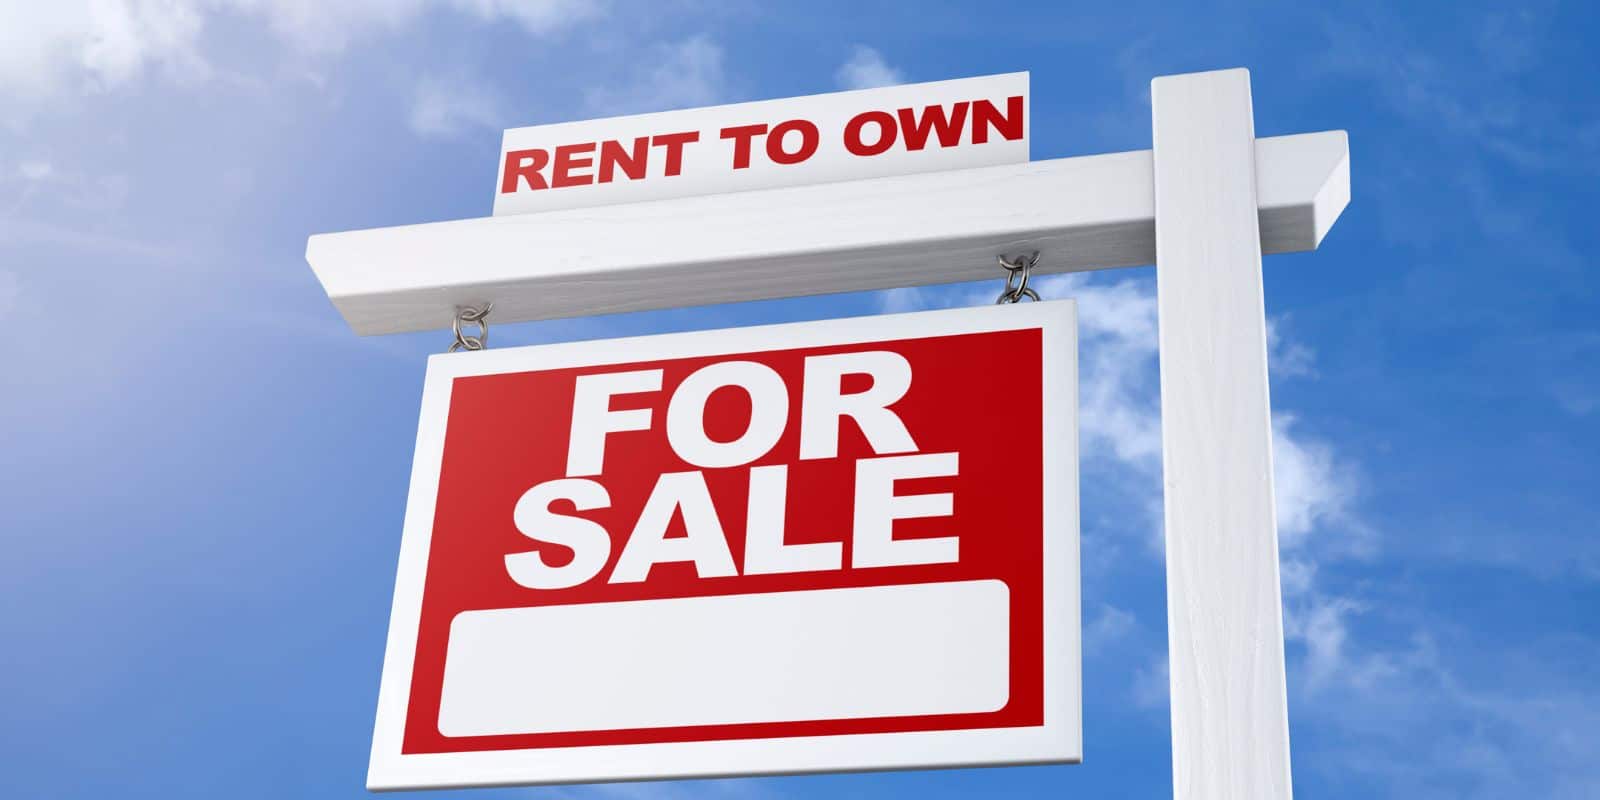 What To Expect When Selling Your House Via Rent To Own in Hernando, FL